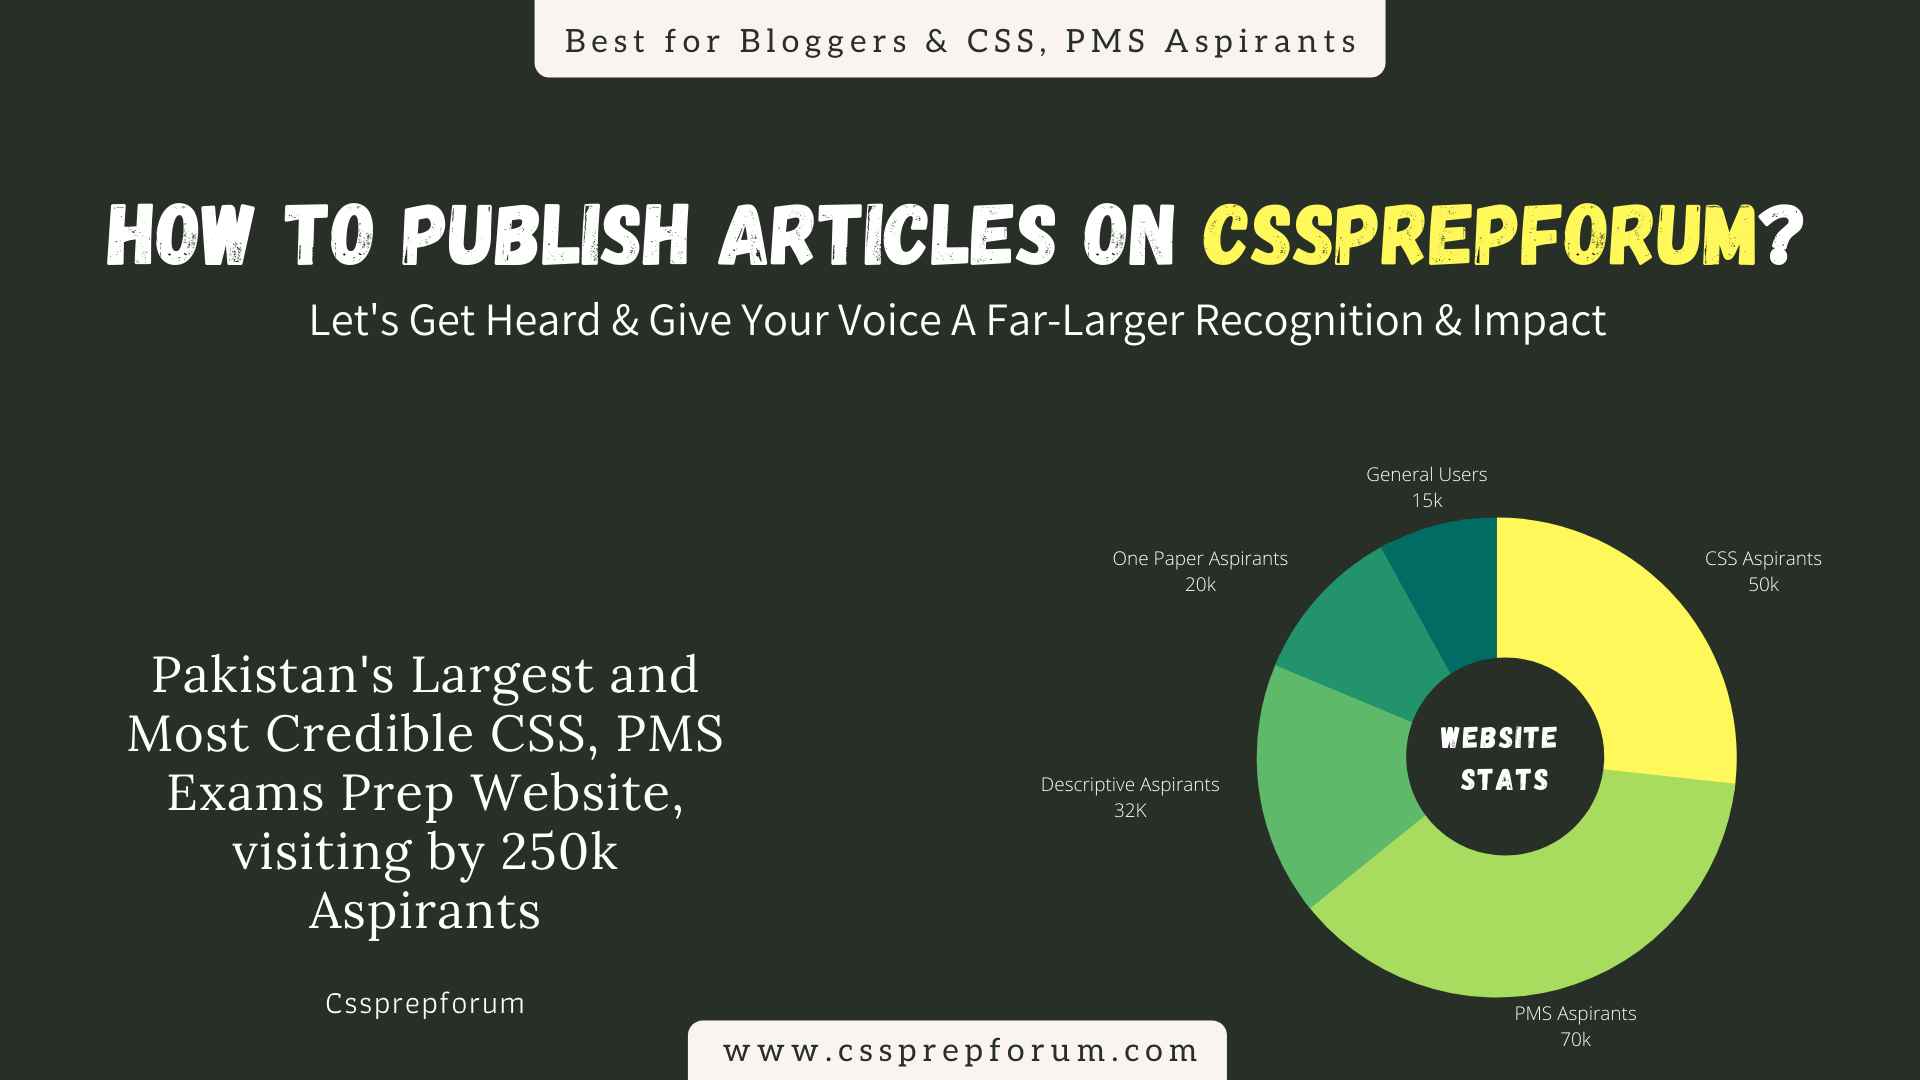 How to Write and Publish a Blog on Cssprepforum (CPF)? Best for CSS, PMS Aspirants